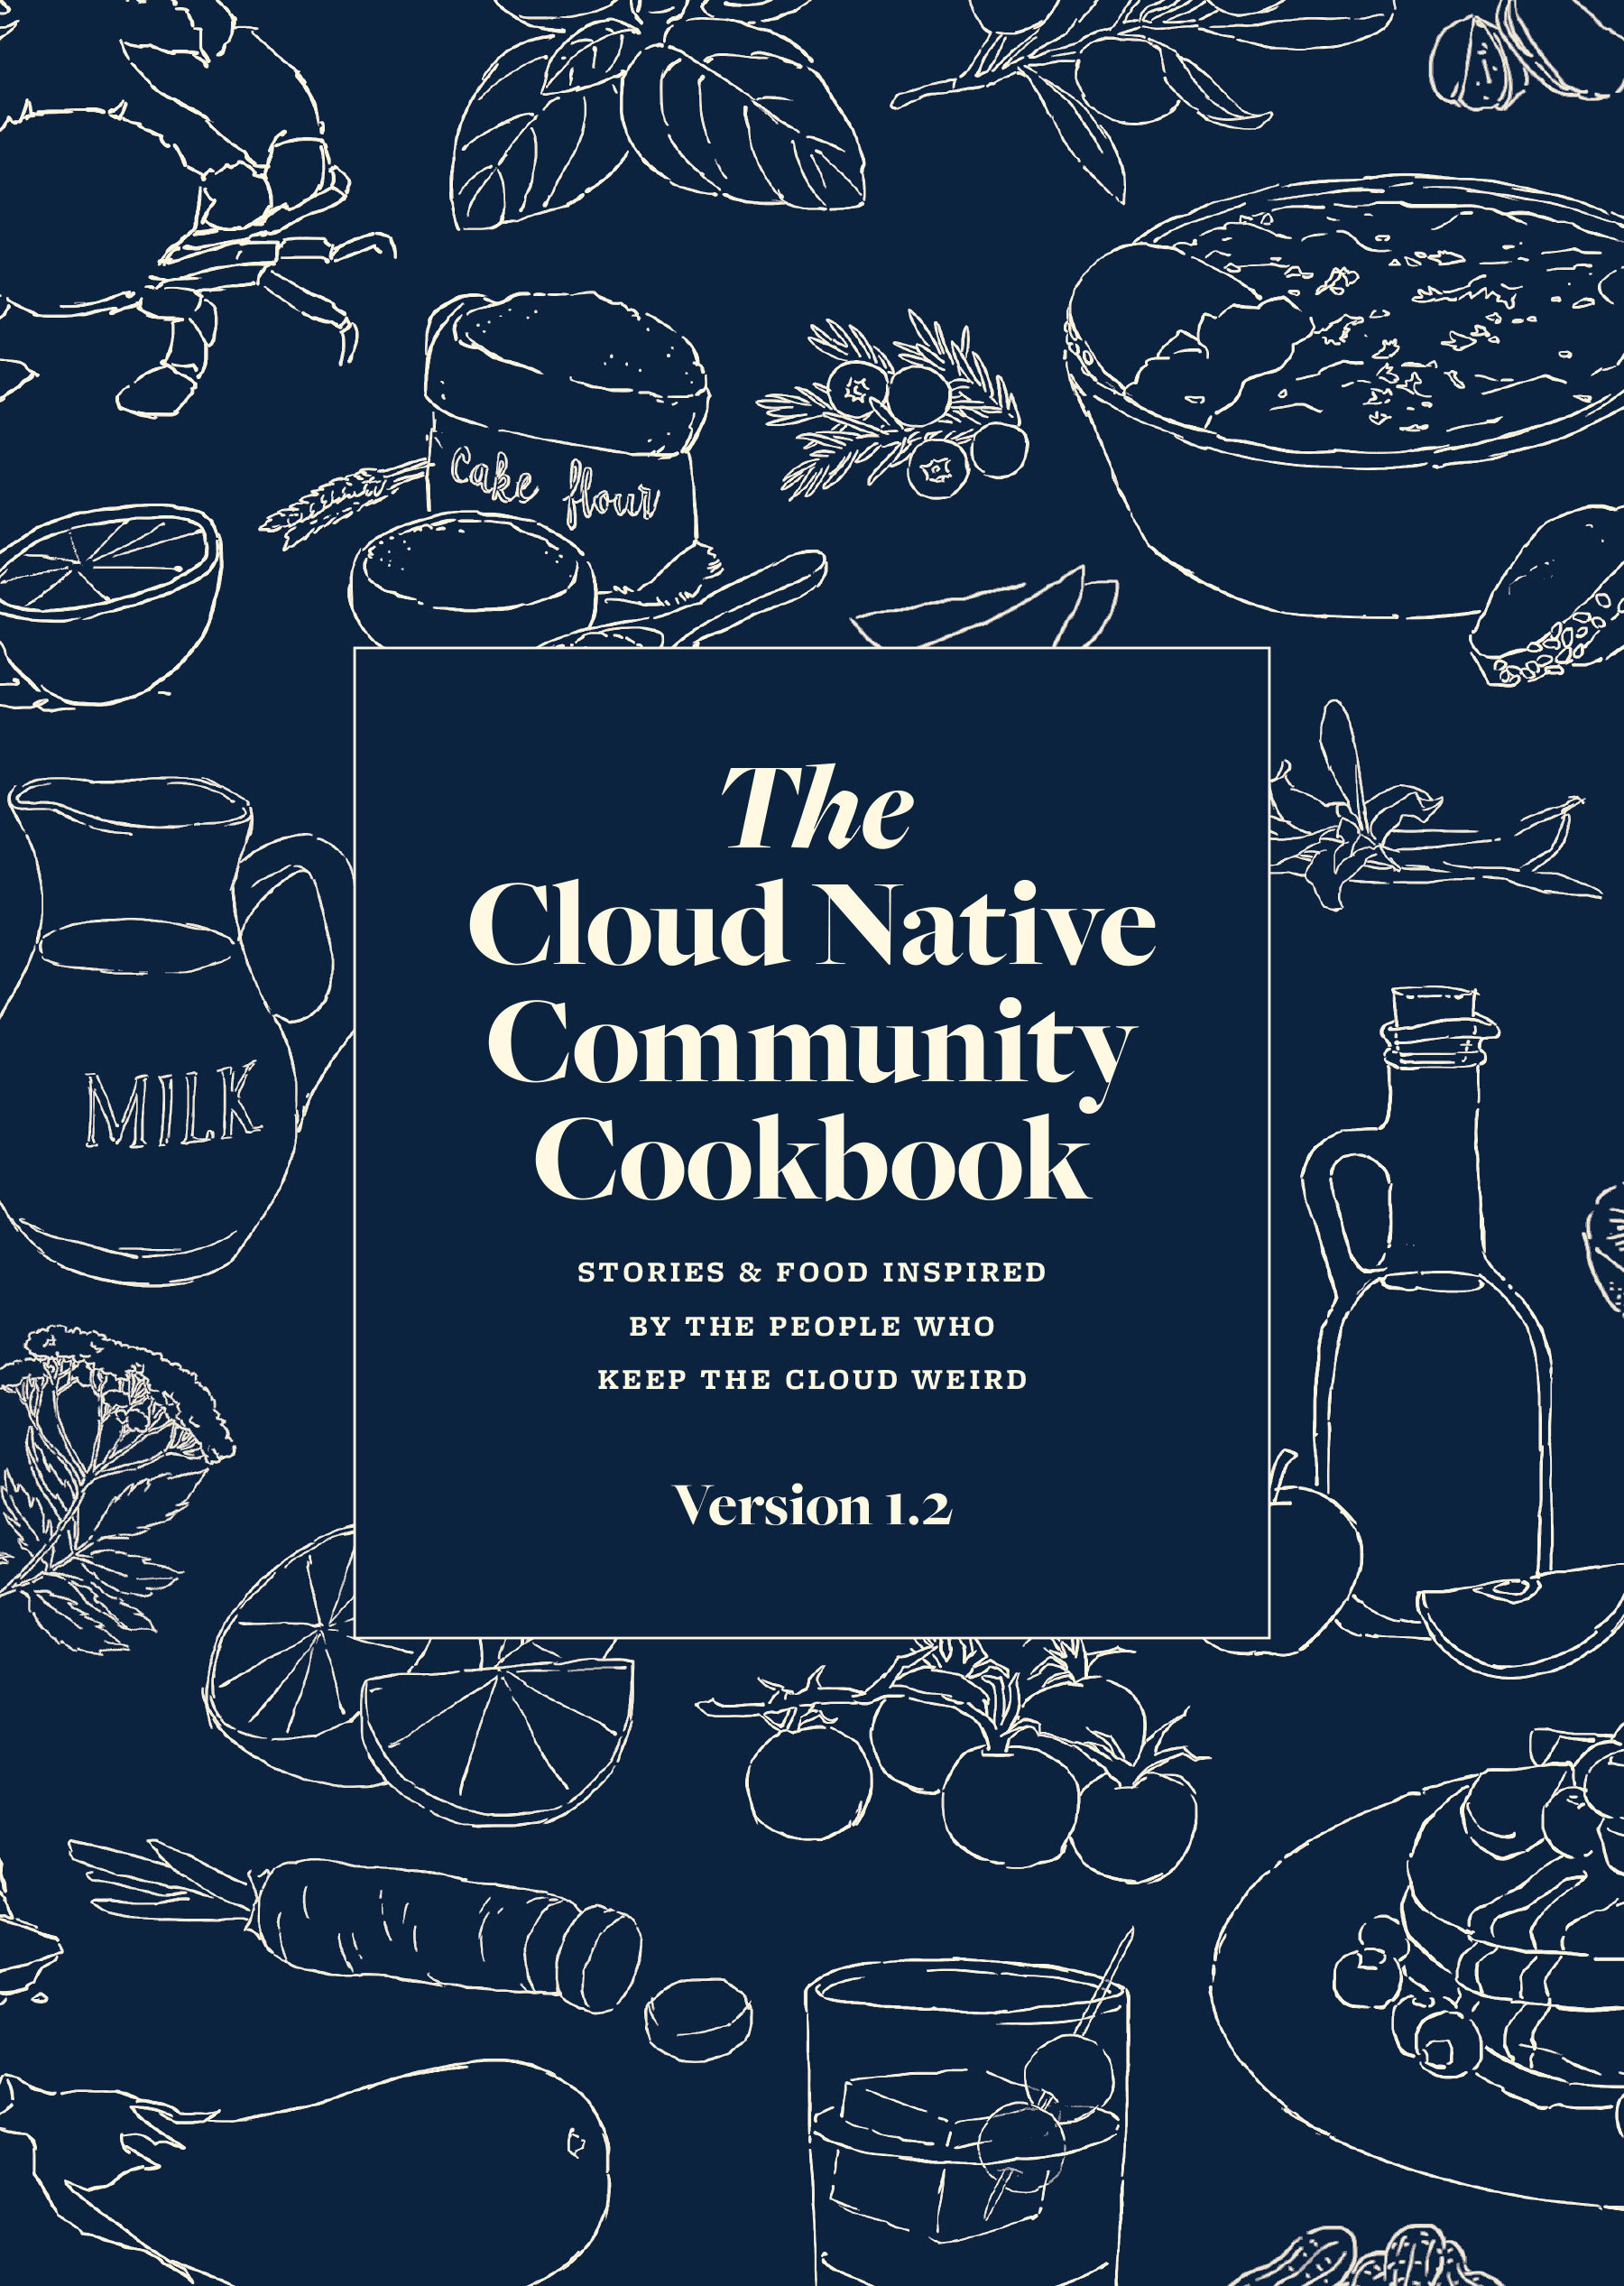 Cover image for the Cloud Native Community Cookbook version 1